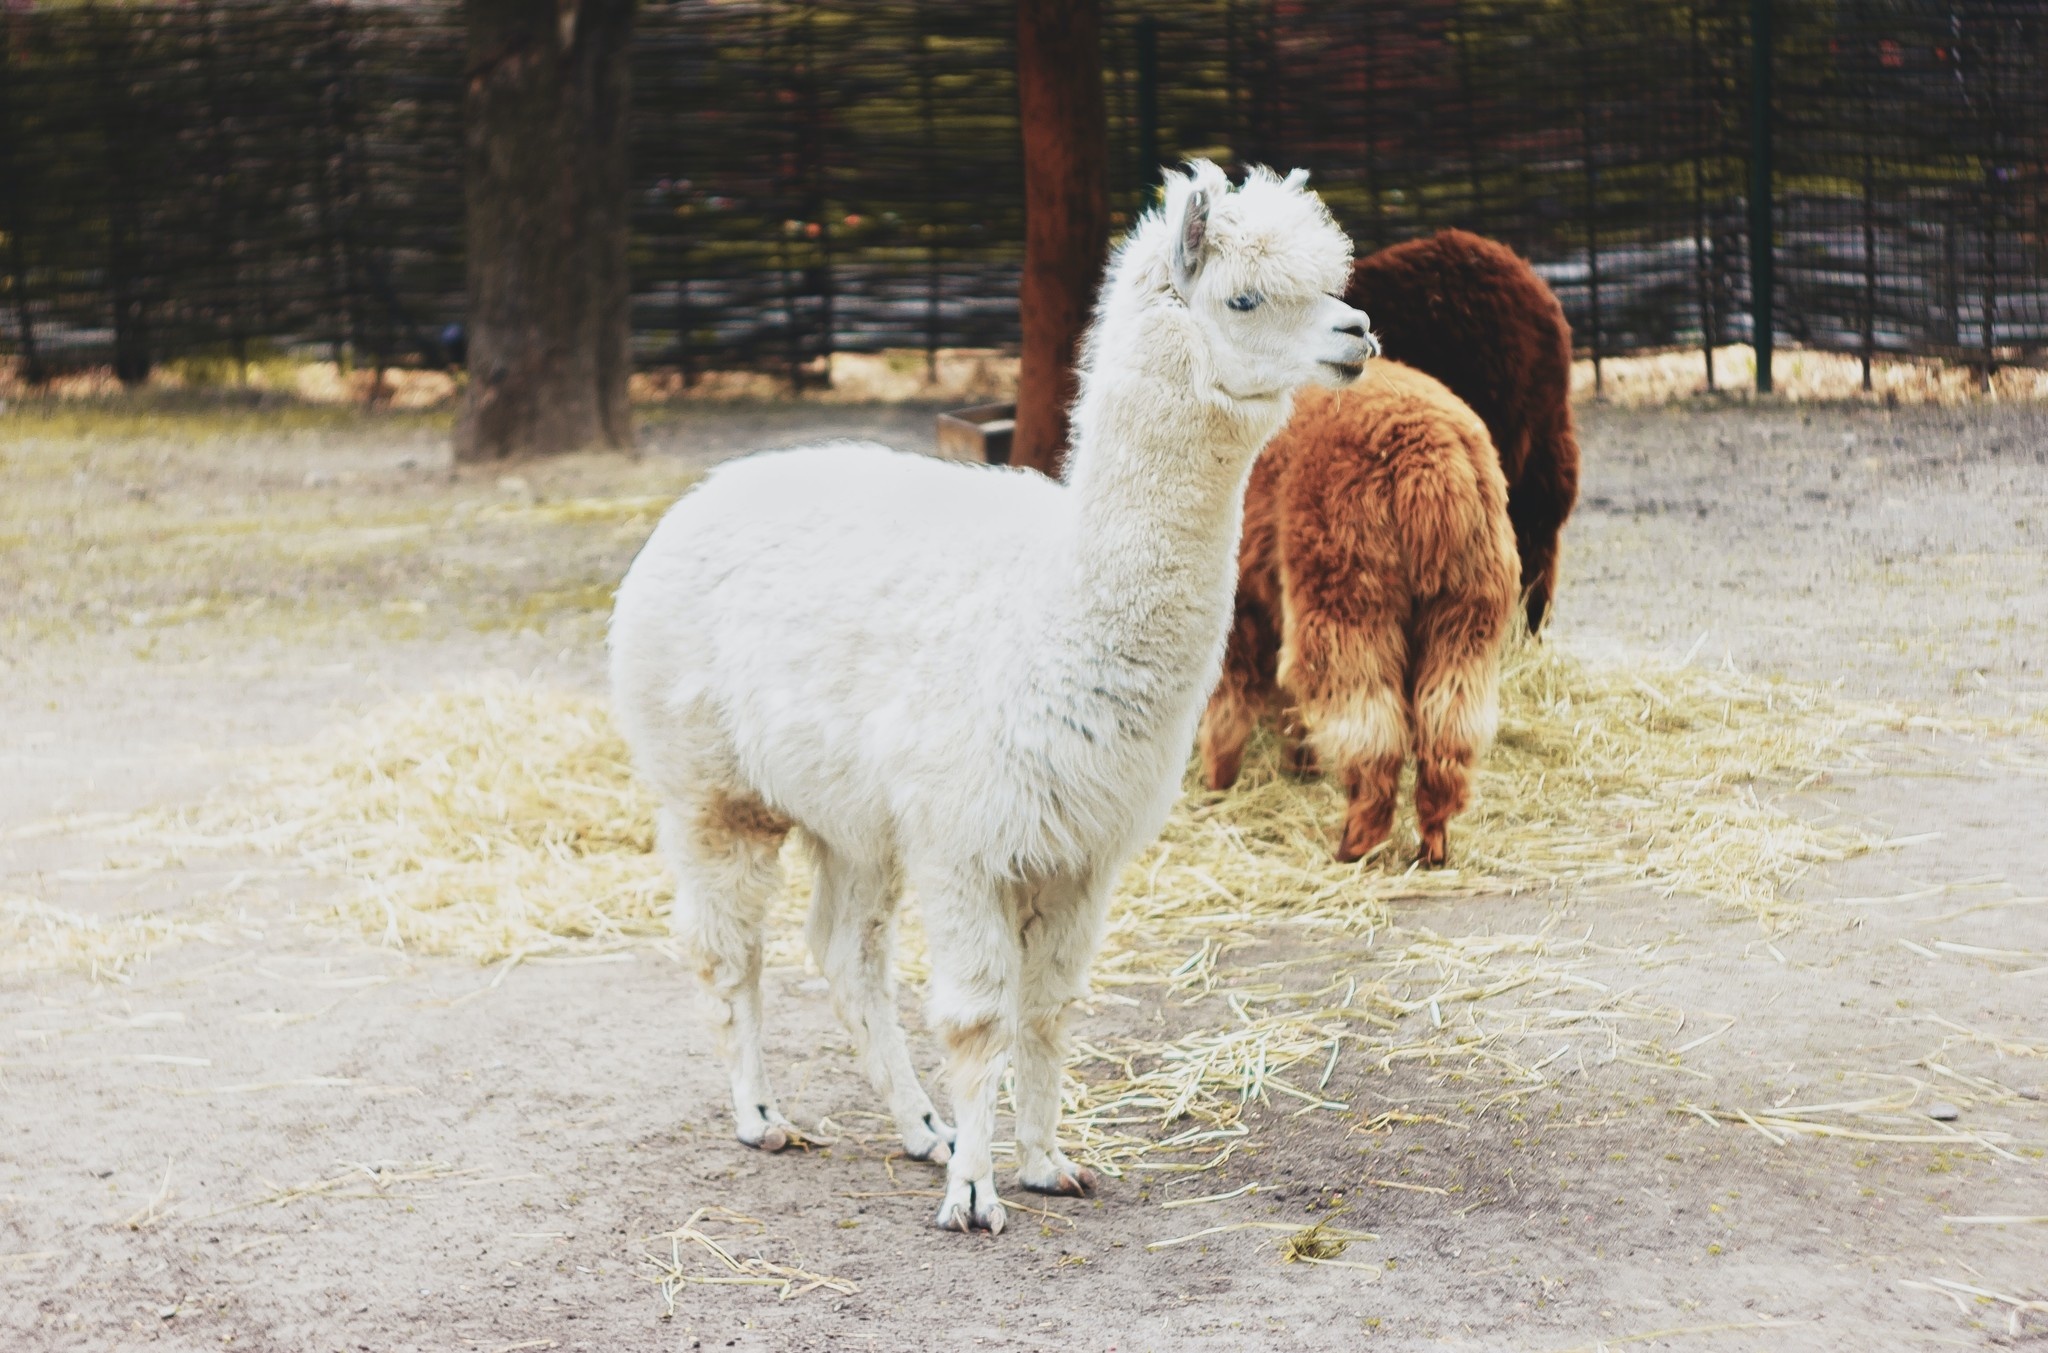 Alpaca vs Llama: What's the difference?!